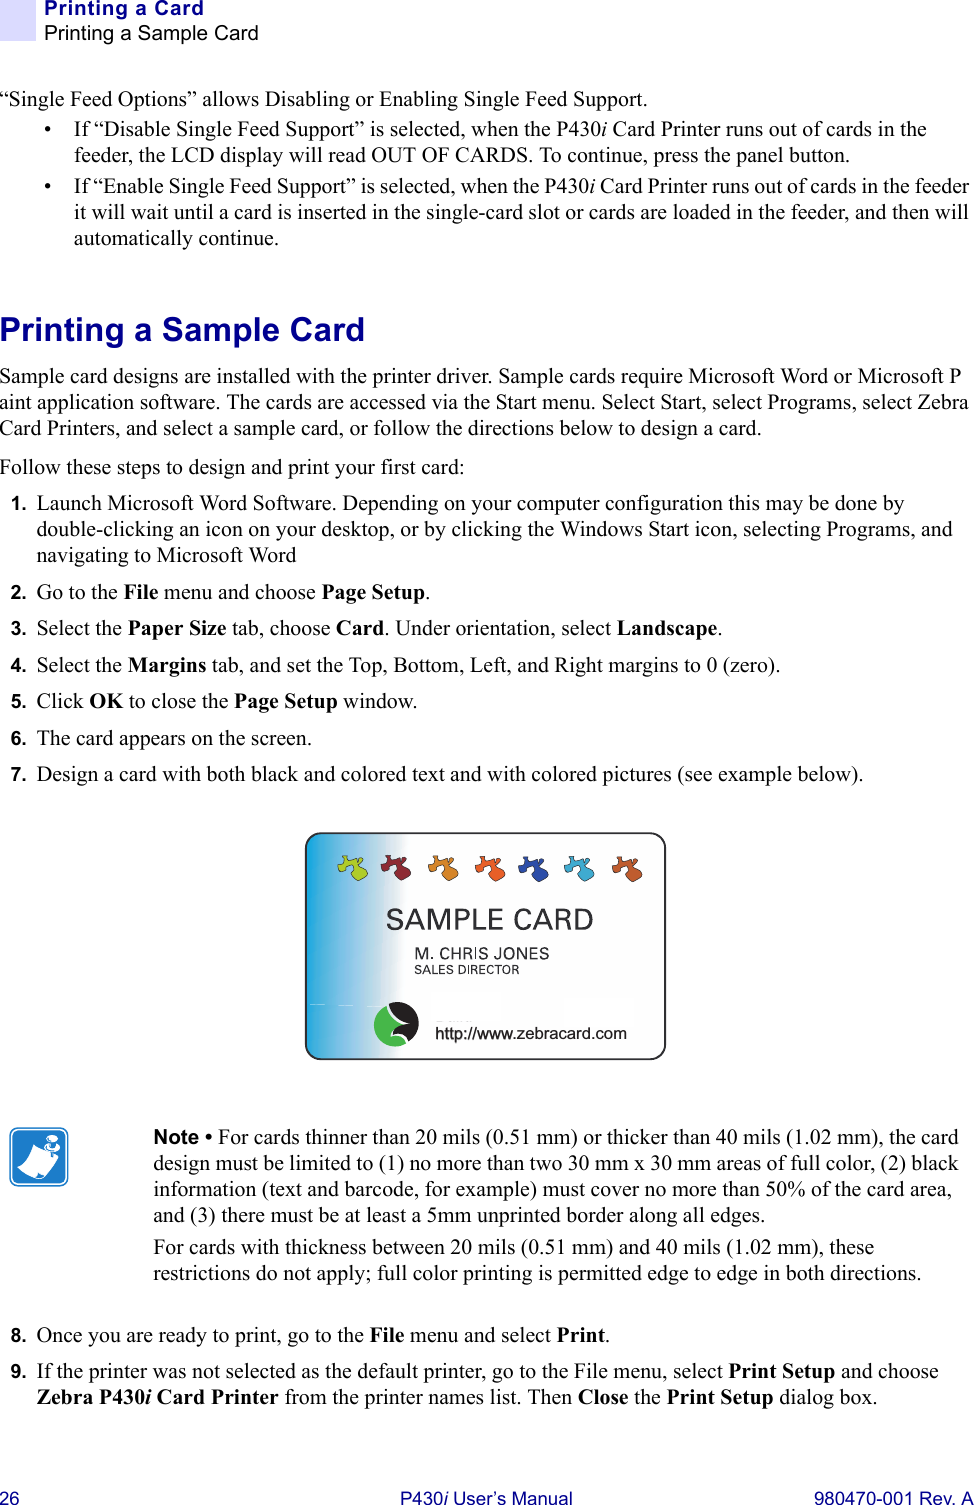 26 P430i User’s Manual 980470-001 Rev. APrinting a CardPrinting a Sample Card“Single Feed Options” allows Disabling or Enabling Single Feed Support.• If “Disable Single Feed Support” is selected, when the P430i Card Printer runs out of cards in the feeder, the LCD display will read OUT OF CARDS. To continue, press the panel button.• If “Enable Single Feed Support” is selected, when the P430i Card Printer runs out of cards in the feeder it will wait until a card is inserted in the single-card slot or cards are loaded in the feeder, and then will automatically continue.Printing a Sample CardSample card designs are installed with the printer driver. Sample cards require Microsoft Word or Microsoft Paint application software. The cards are accessed via the Start menu. Select Start, select Programs, select Zebra Card Printers, and select a sample card, or follow the directions below to design a card.Follow these steps to design and print your first card:1. Launch Microsoft Word Software. Depending on your computer configuration this may be done by double-clicking an icon on your desktop, or by clicking the Windows Start icon, selecting Programs, and navigating to Microsoft Word2. Go to the File menu and choose Page Setup.3. Select the Paper Size tab, choose Card. Under orientation, select Landscape.4. Select the Margins tab, and set the Top, Bottom, Left, and Right margins to 0 (zero).5. Click OK to close the Page Setup window.6. The card appears on the screen.7. Design a card with both black and colored text and with colored pictures (see example below).8. Once you are ready to print, go to the File menu and select Print.9. If the printer was not selected as the default printer, go to the File menu, select Print Setup and choose Zebra P430i Card Printer from the printer names list. Then Close the Print Setup dialog box.Note • For cards thinner than 20 mils (0.51 mm) or thicker than 40 mils (1.02 mm), the card design must be limited to (1) no more than two 30 mm x 30 mm areas of full color, (2) black information (text and barcode, for example) must cover no more than 50% of the card area, and (3) there must be at least a 5mm unprinted border along all edges.For cards with thickness between 20 mils (0.51 mm) and 40 mils (1.02 mm), these restrictions do not apply; full color printing is permitted edge to edge in both directions.us!http://www.zebracard.com